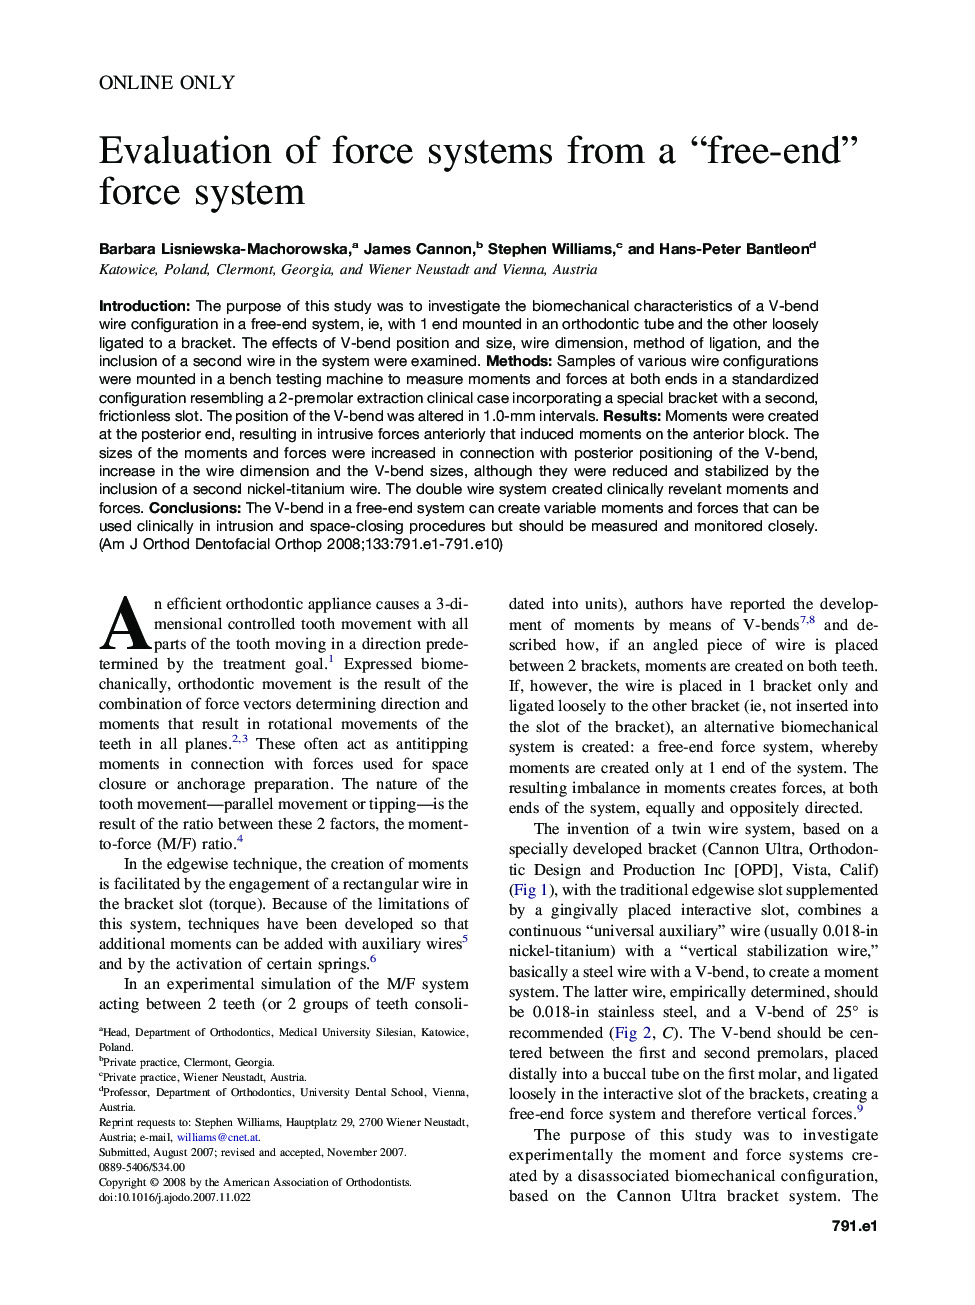 Evaluation of force systems from a “free-end” force system